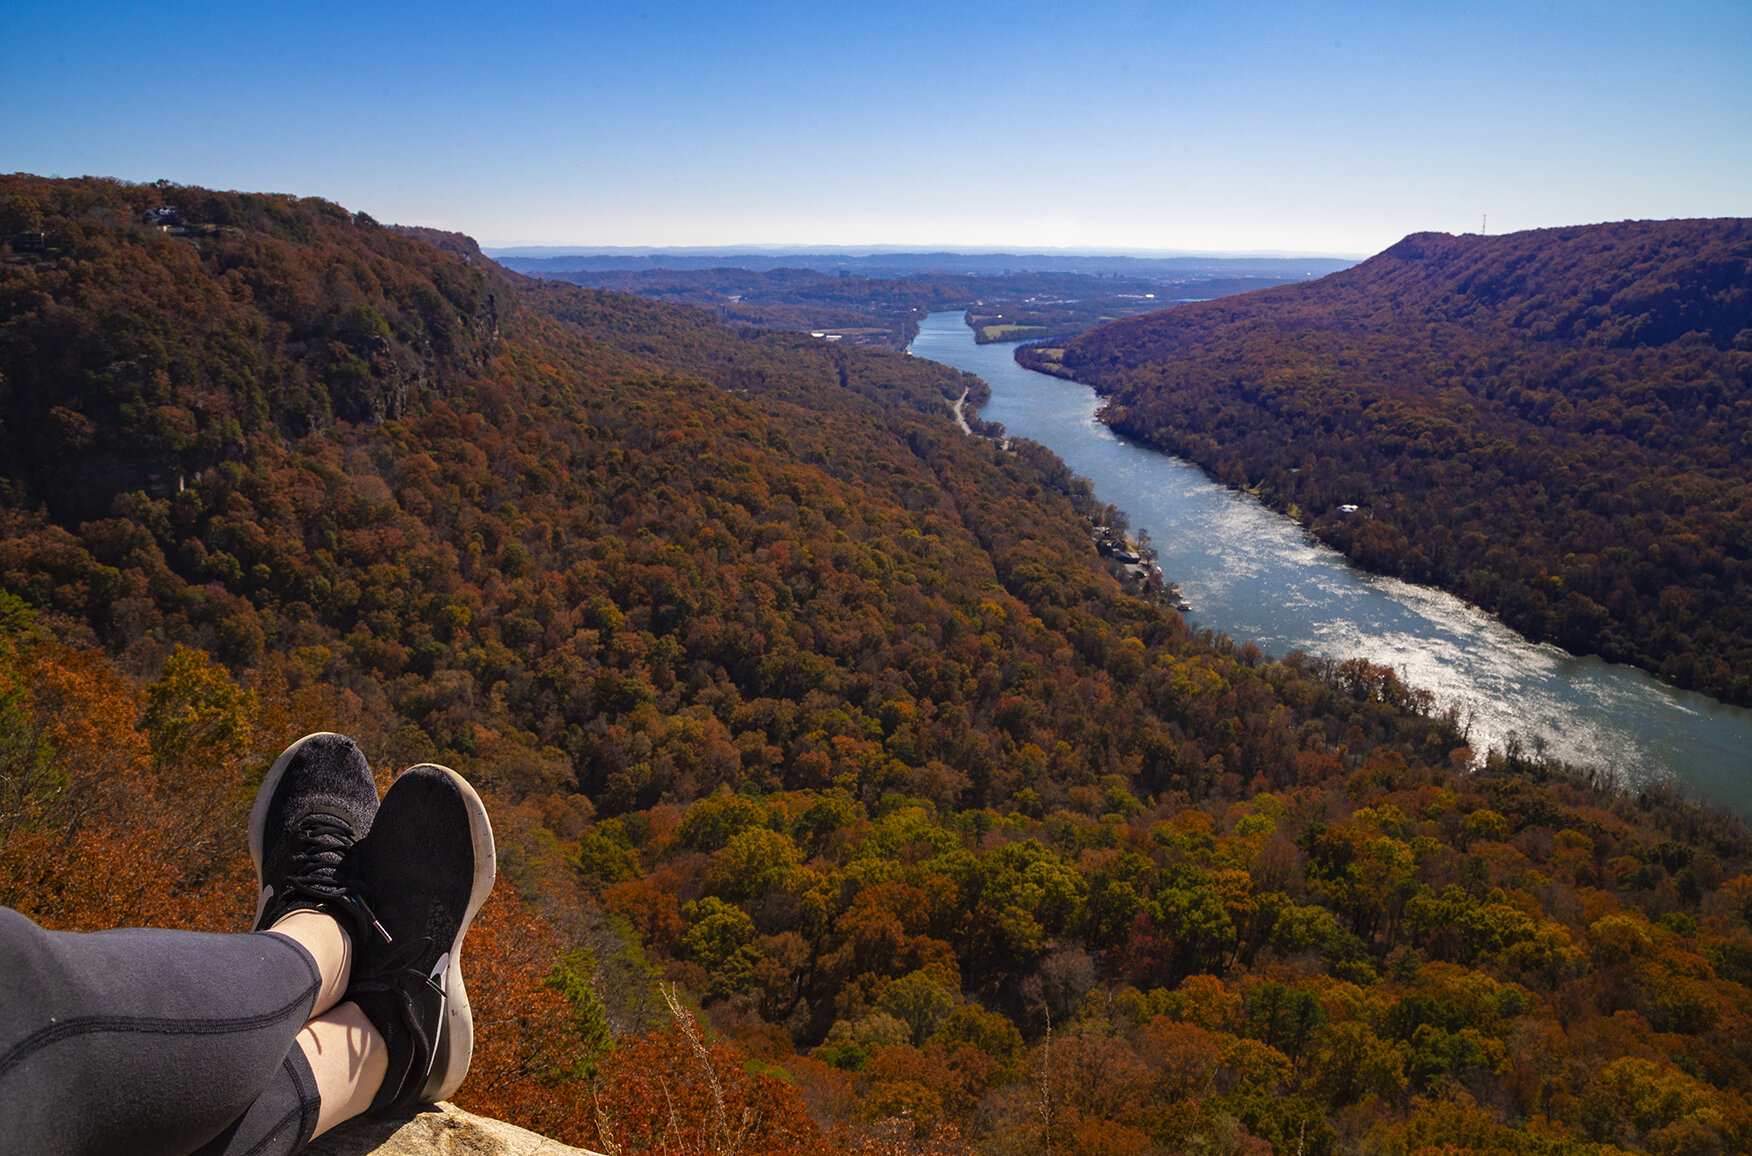  The view on Lookout Mountain, Chattanooga, Tennessee 